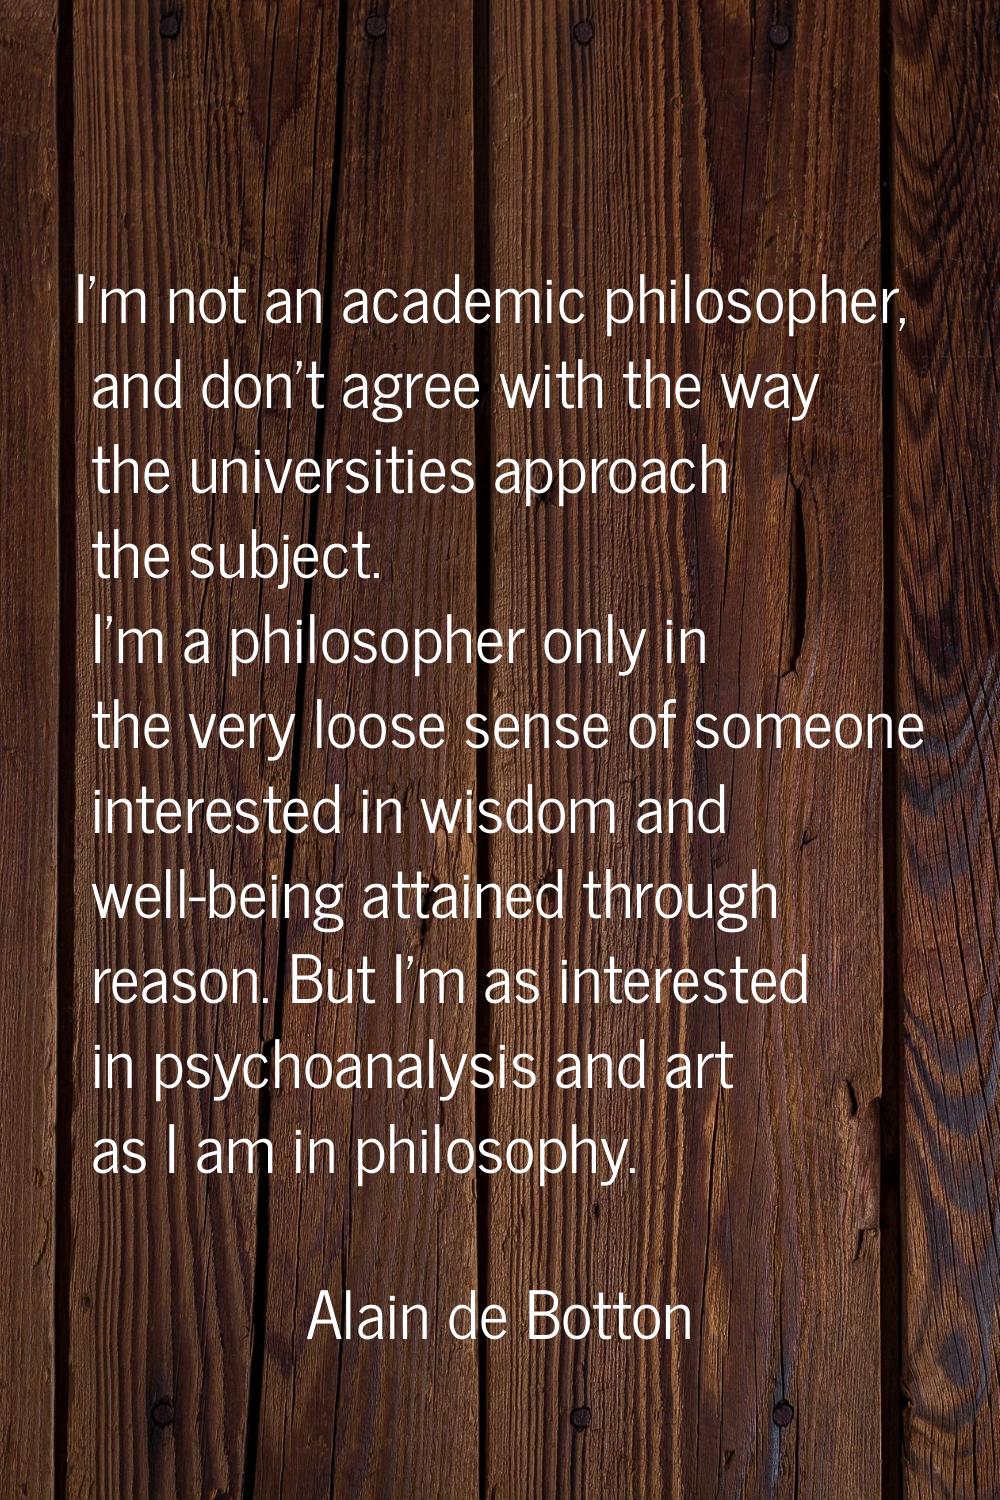 I'm not an academic philosopher, and don't agree with the way the universities approach the subject